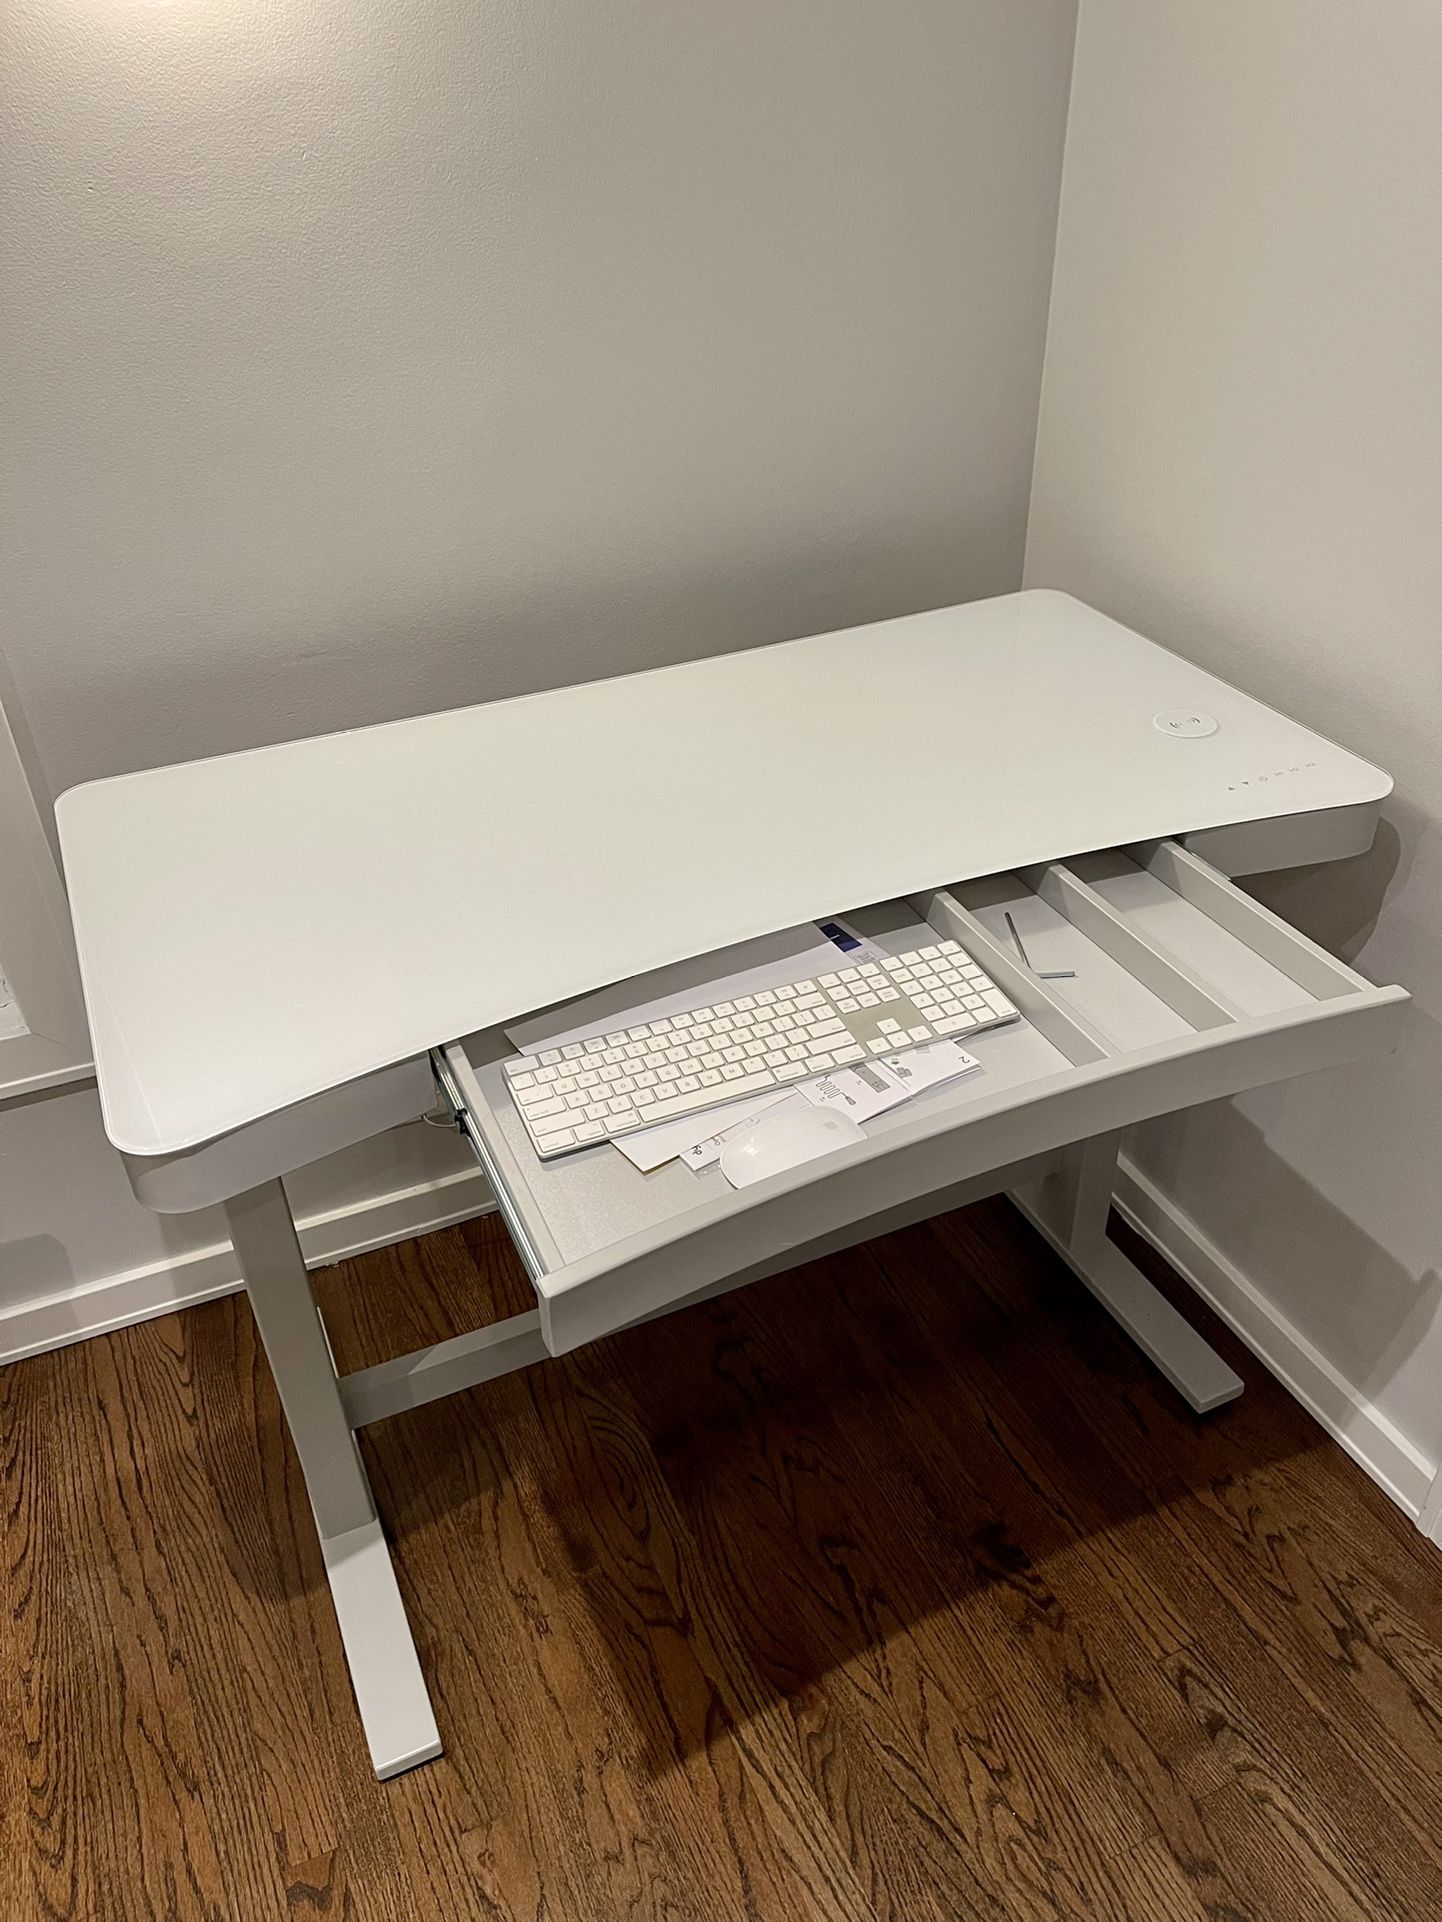 Electric Standing desk